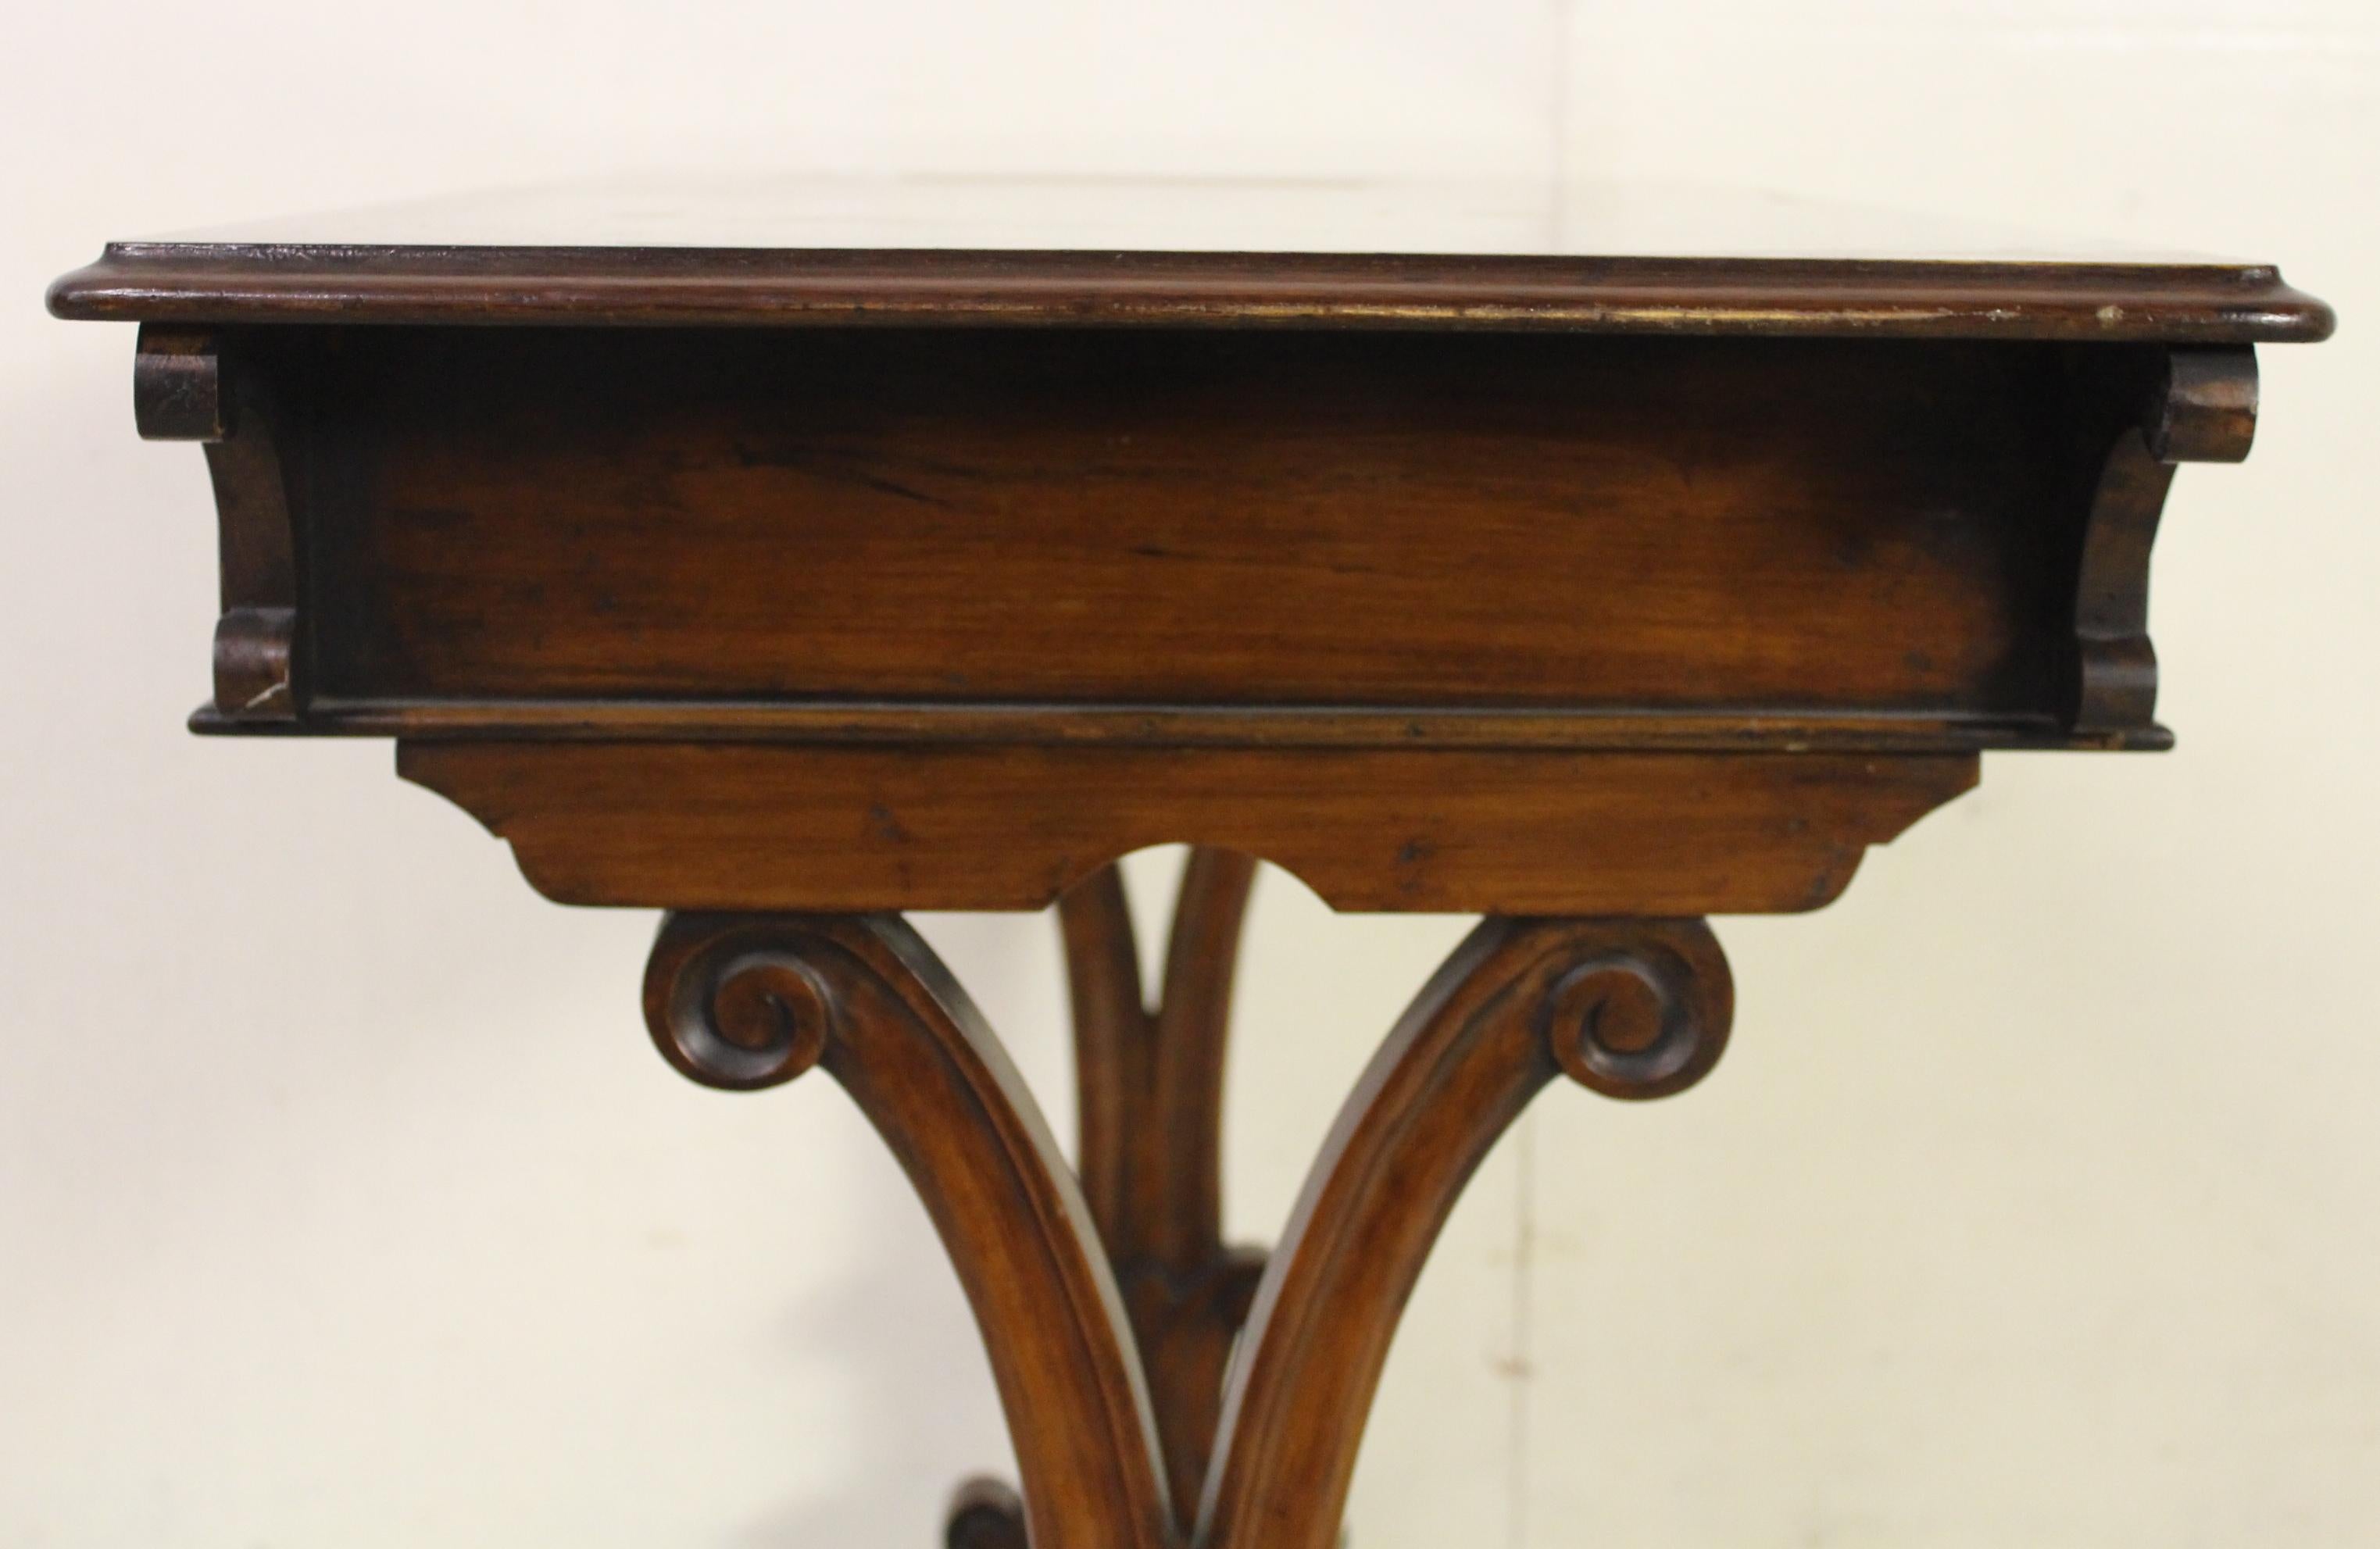 A lovely Victorian period burr walnut side, or lamp, table. Well-constructed in solid walnut with attractive burr walnut veneers to the top. The rectangular top is finished with a moulded edge and decorated with pretty inlaid detailing. There is a